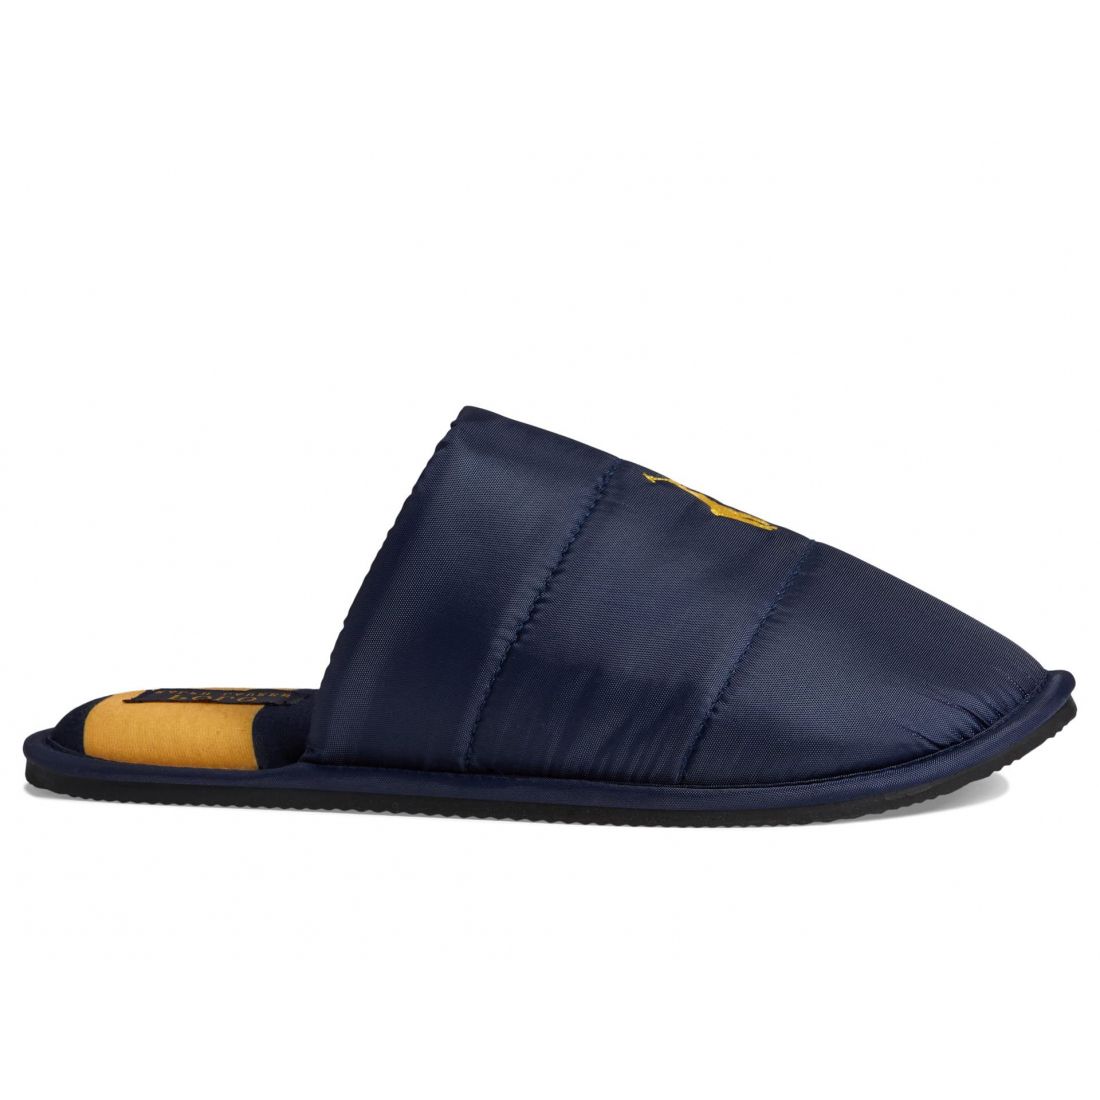 Polo Ralph Lauren - Chaussons 'Kalrence' pour Hommes